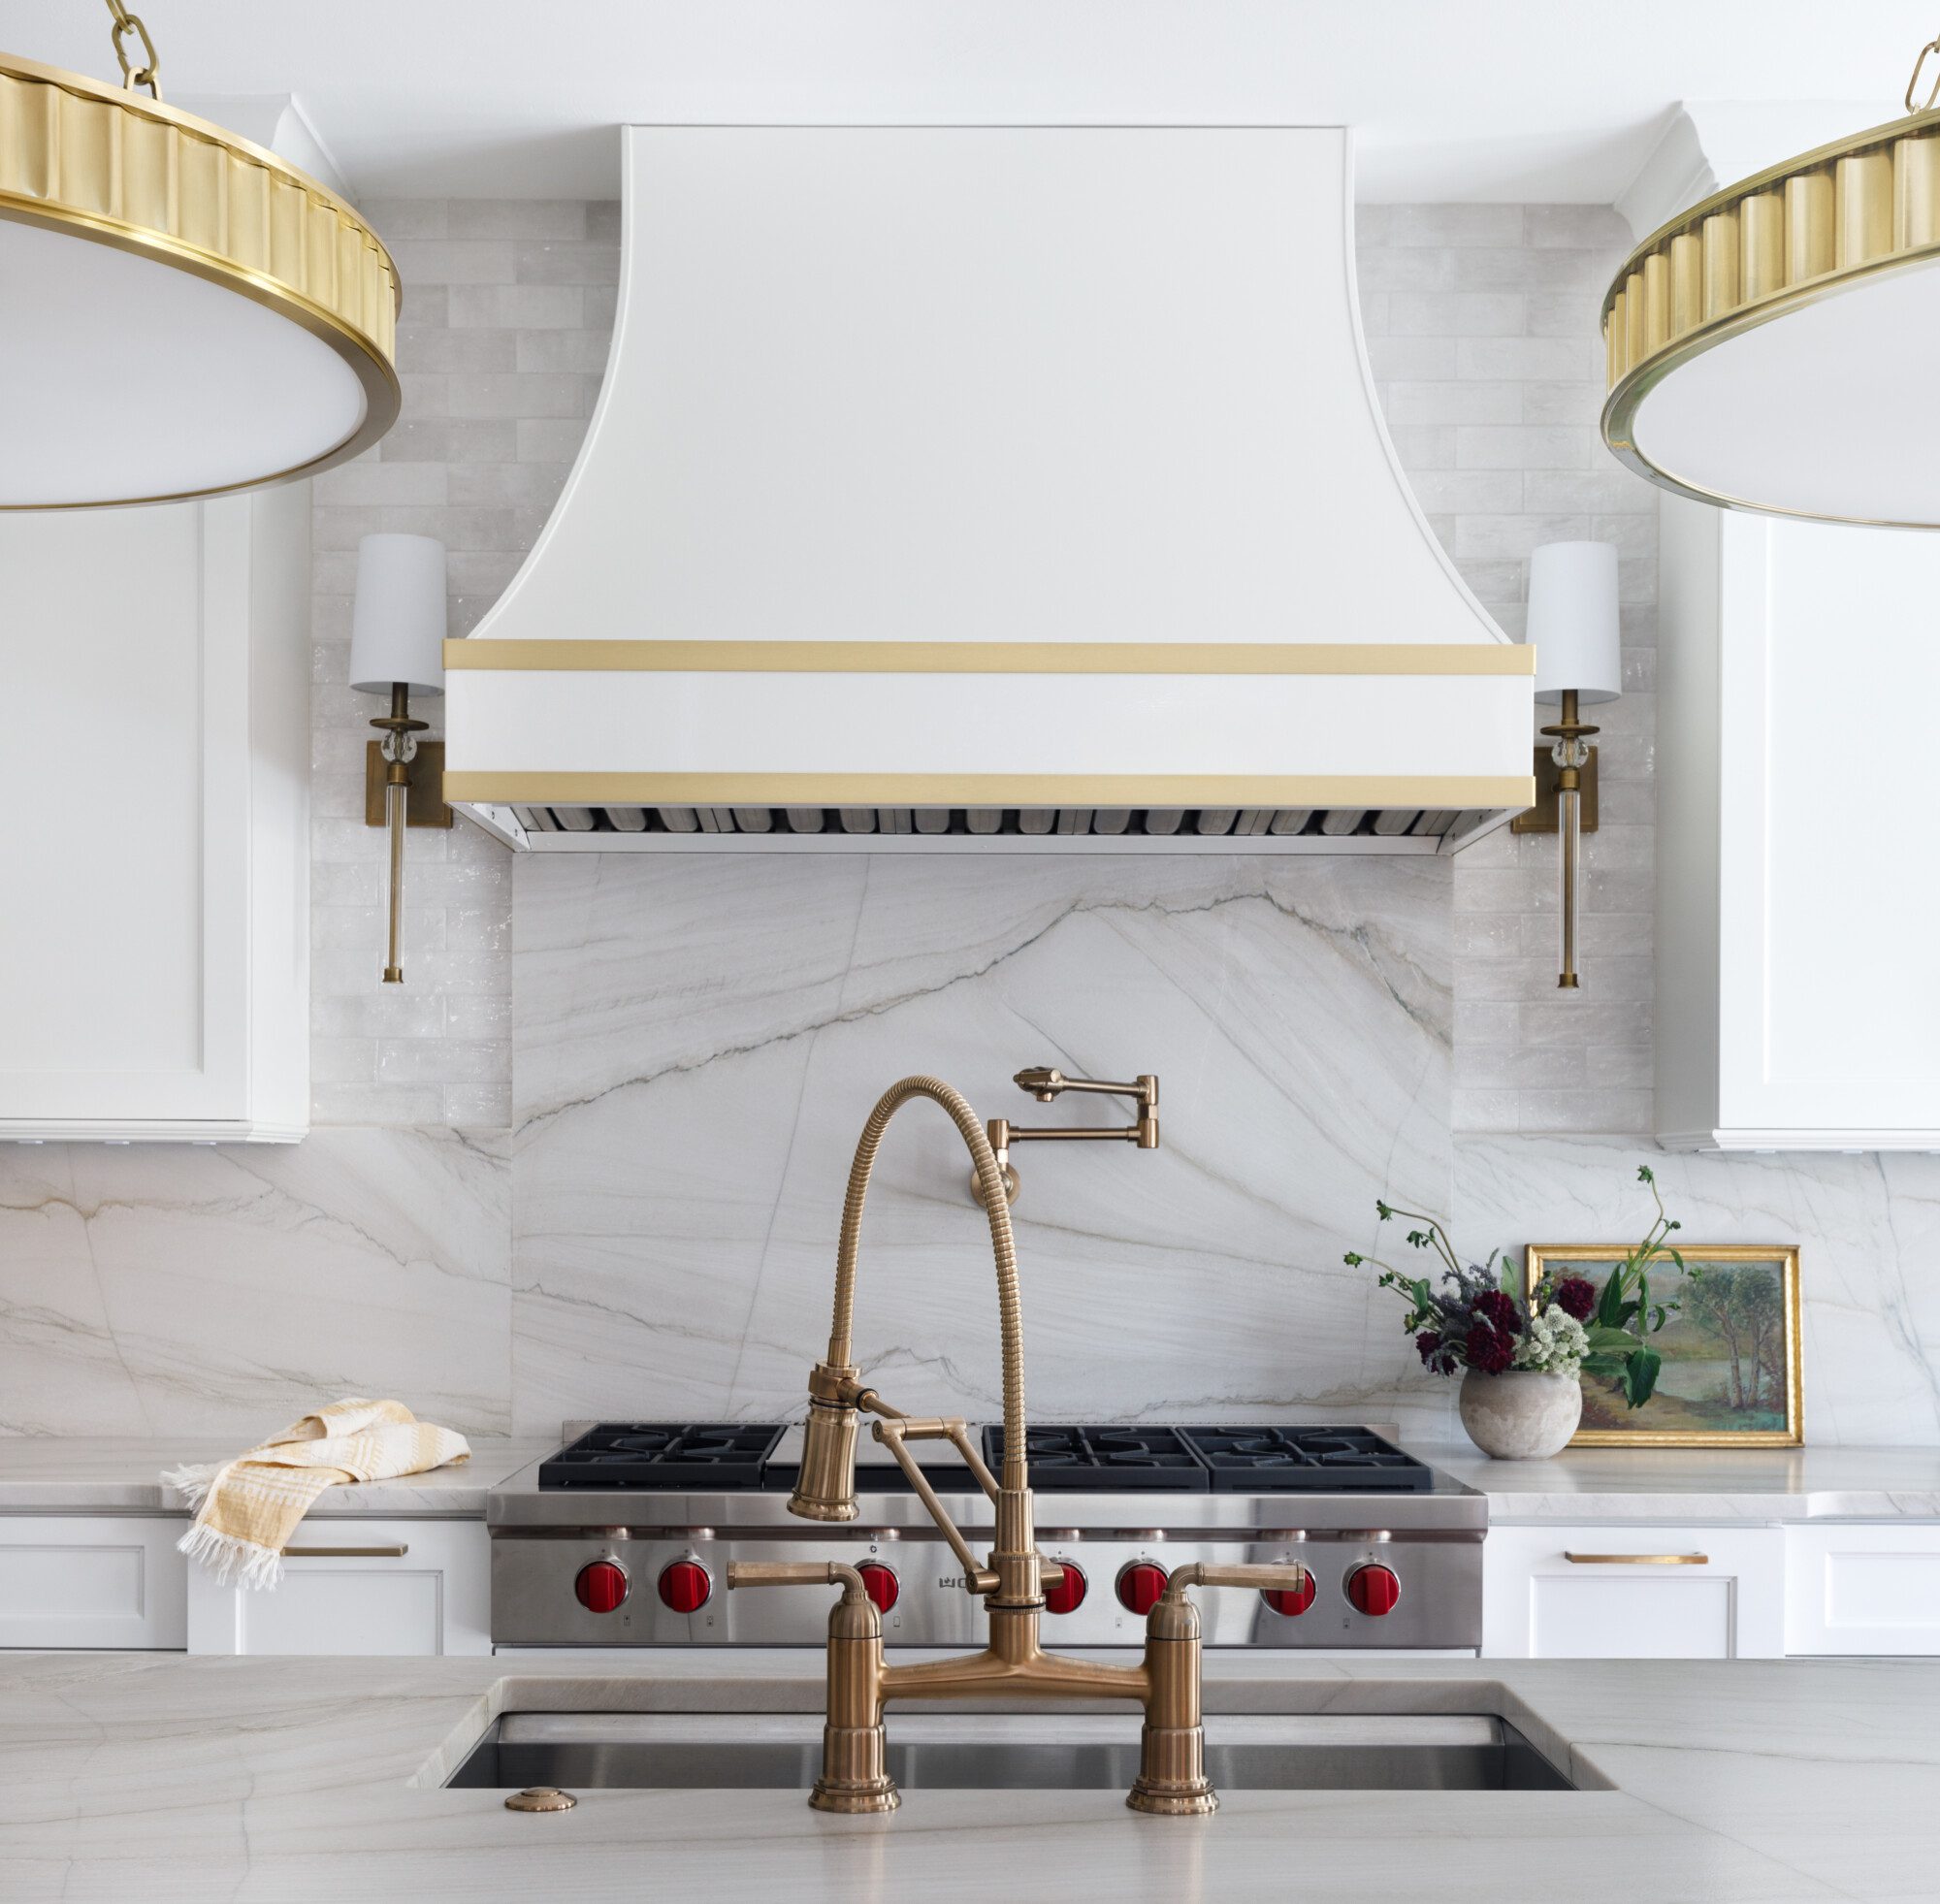 marble and white create an elegant kitchen